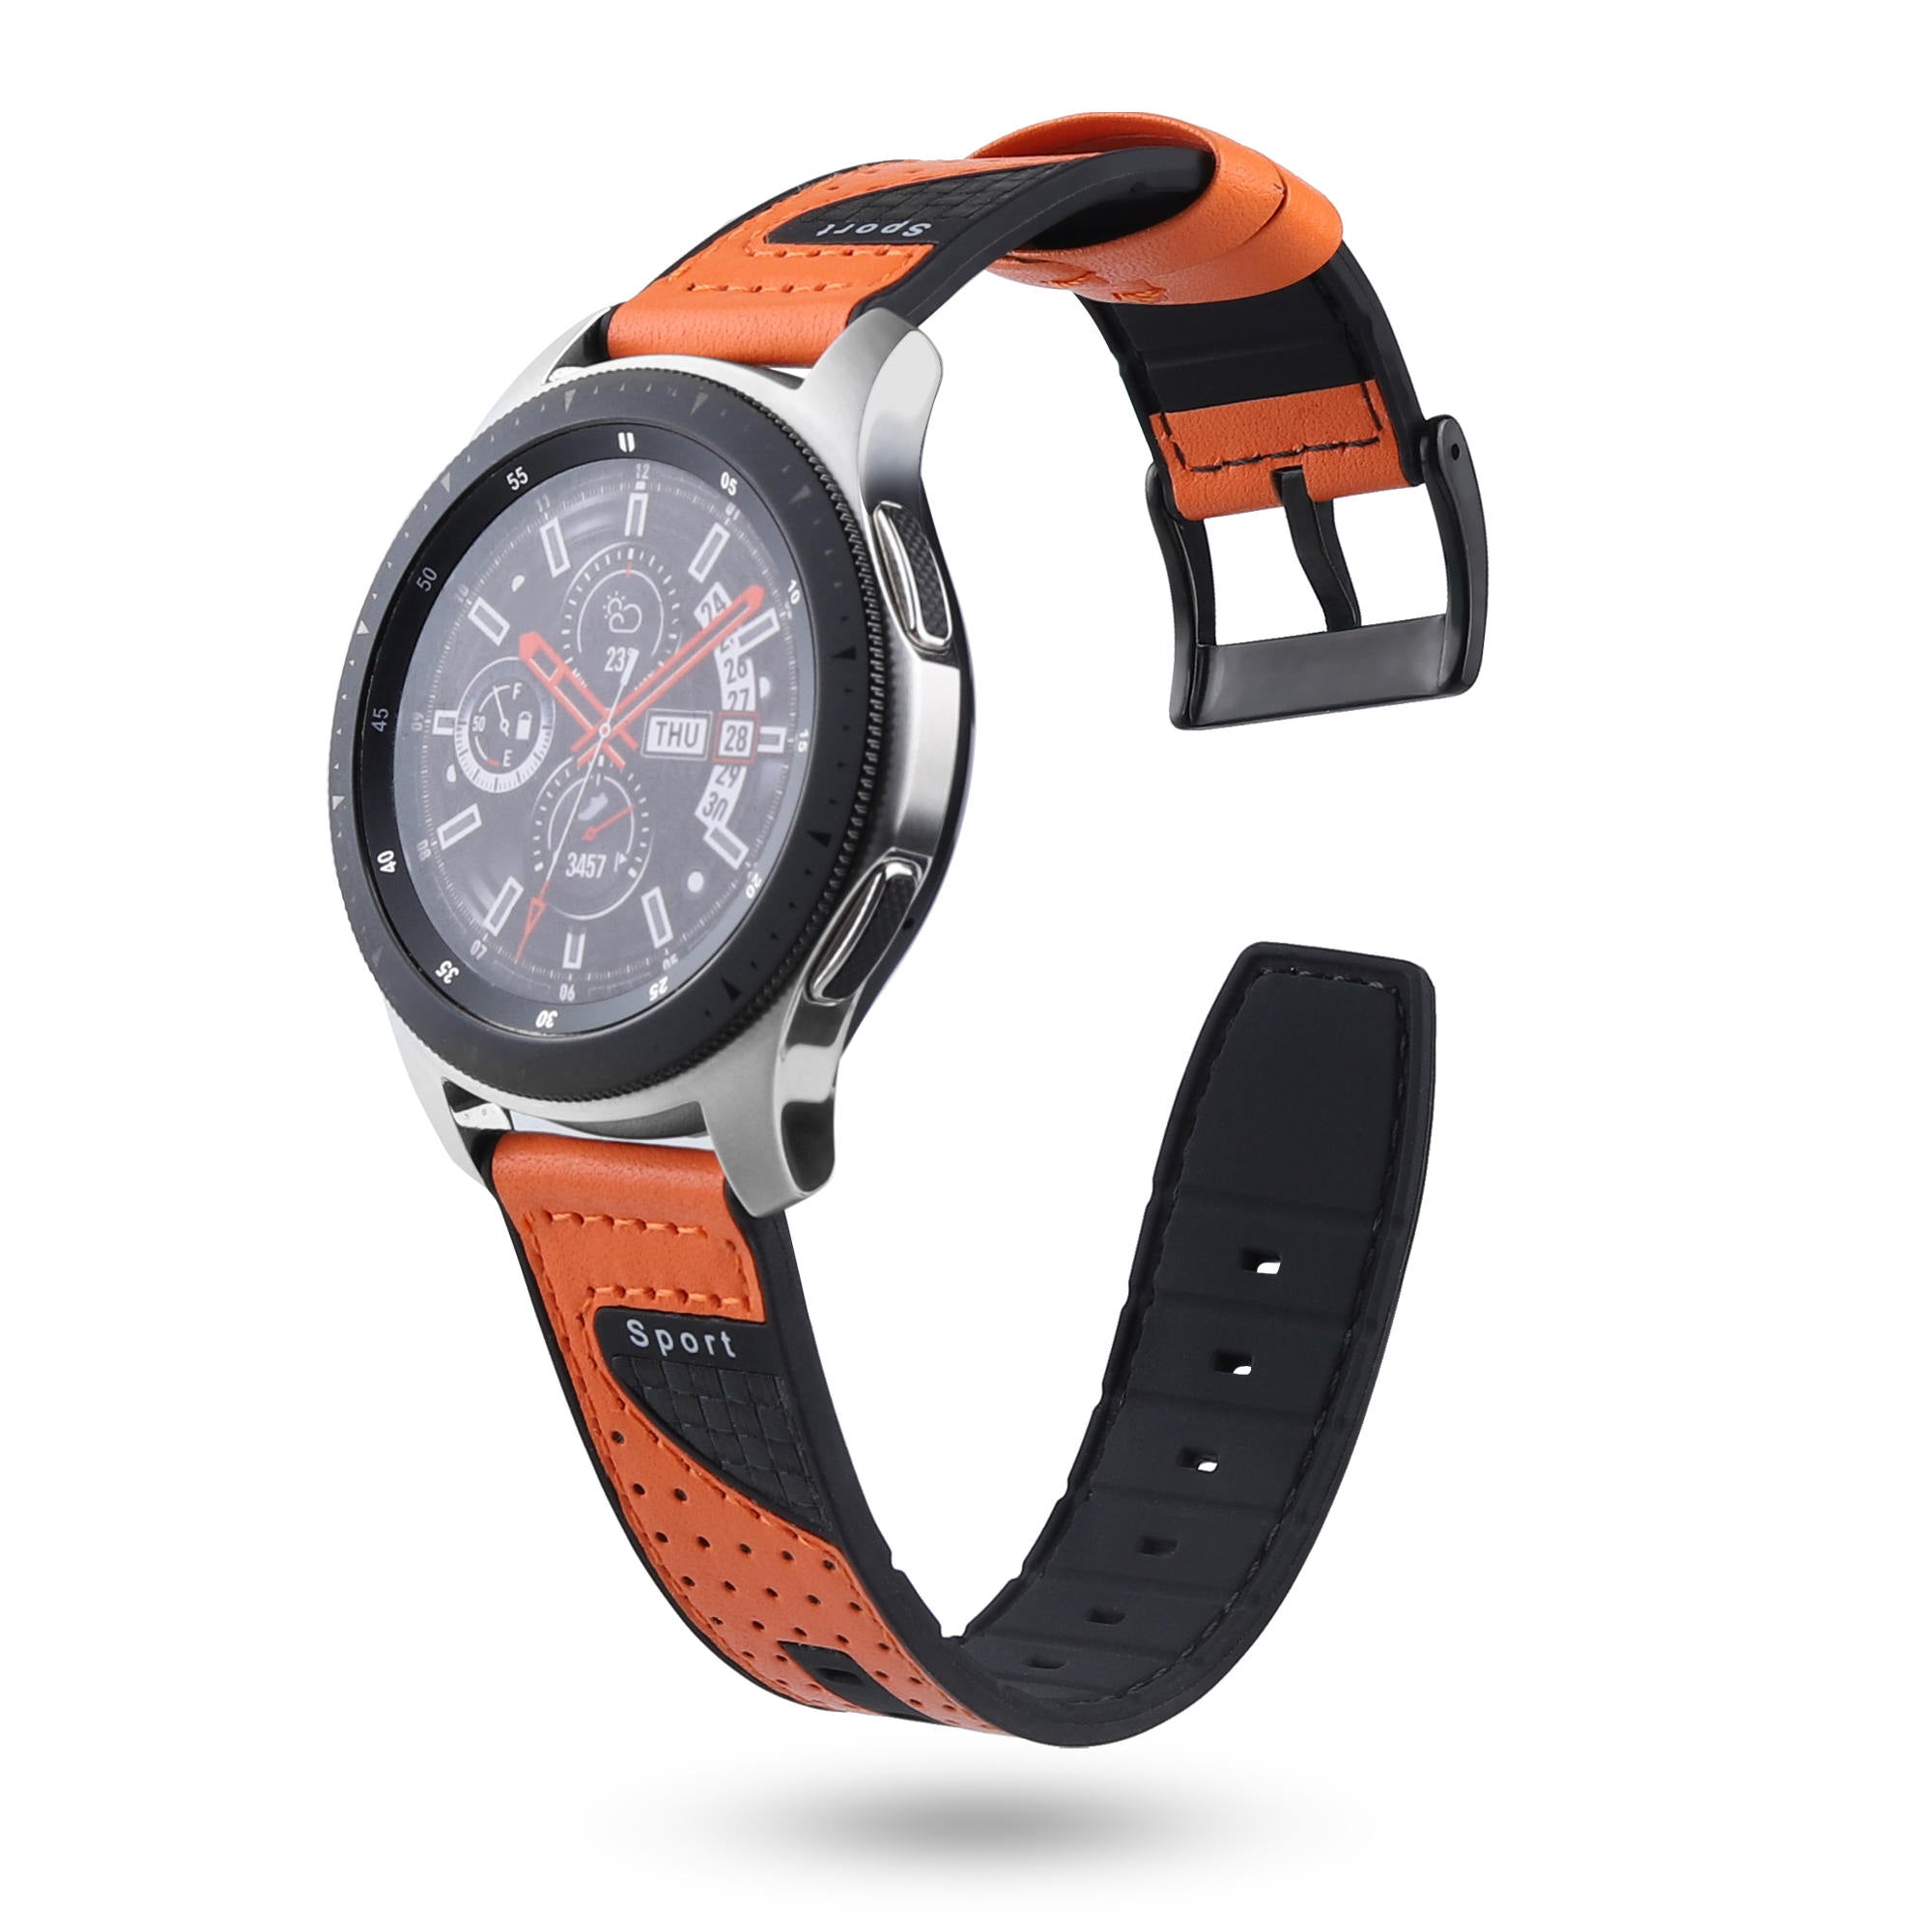 22mm Carbon Fiber Leather Coated Silicone Watch Strap for Huawei Watch GT2/Galaxy Watch 46mm etc. - Orange